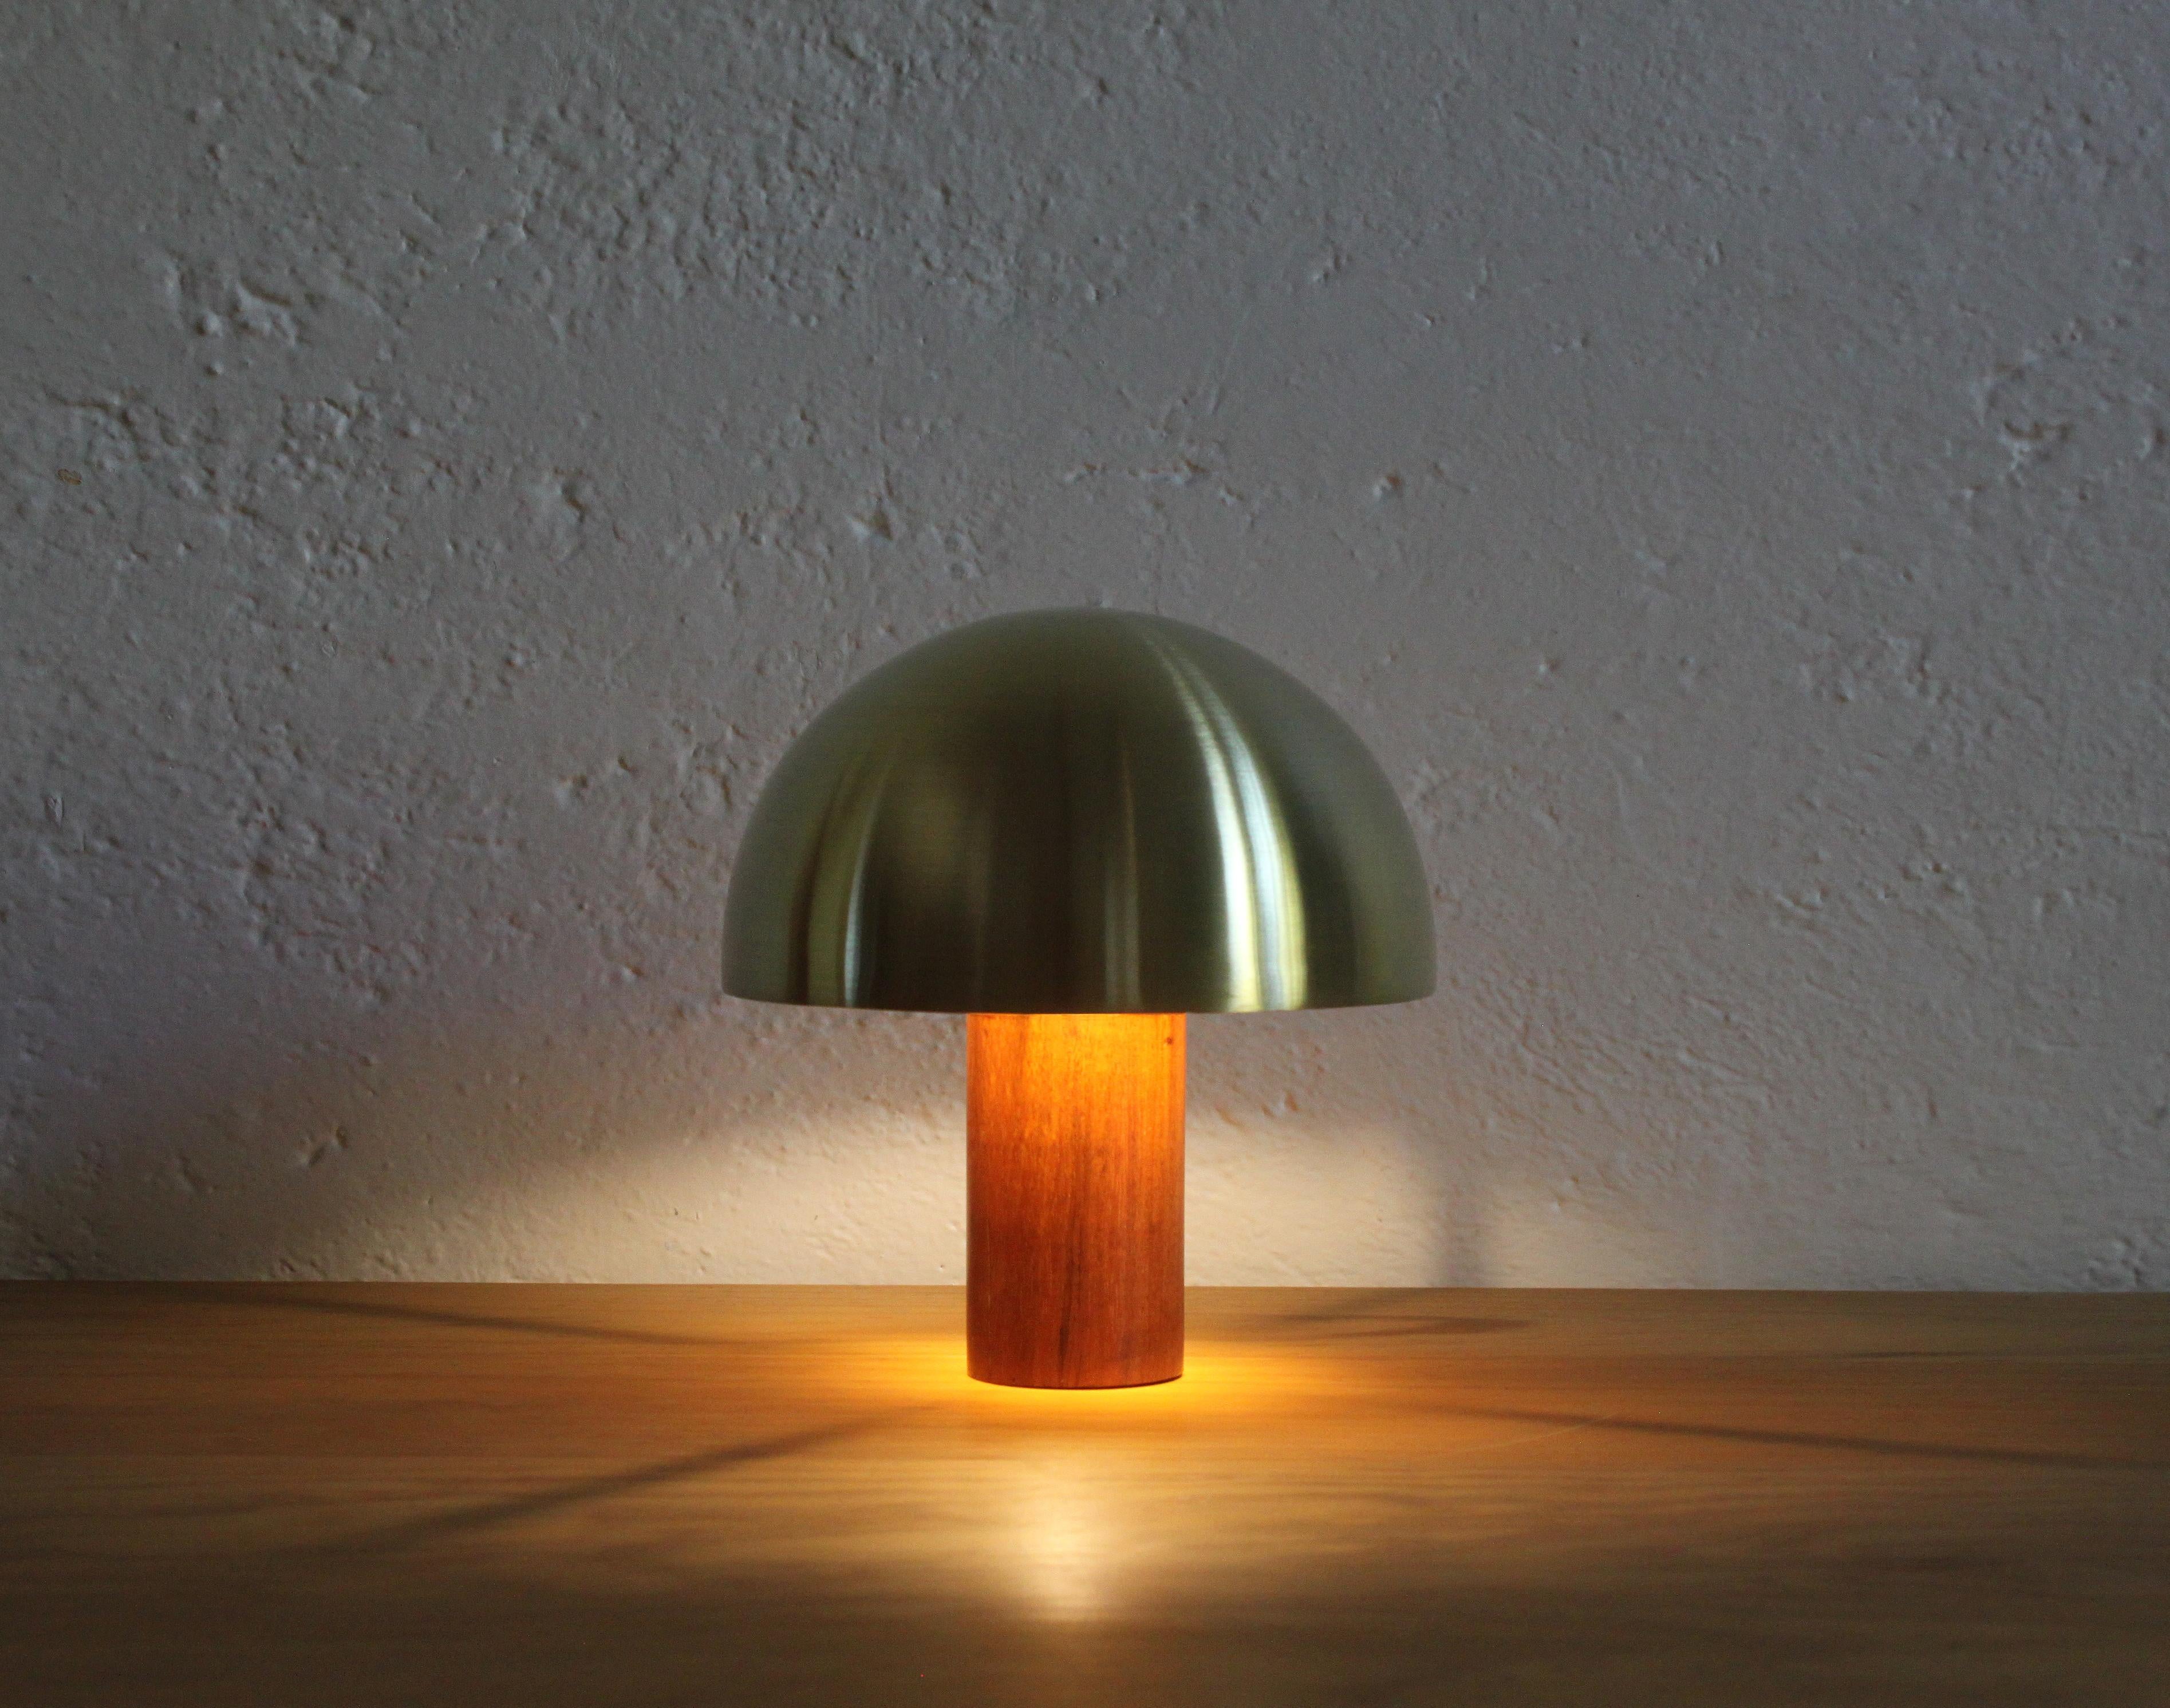 Acento lamp is made of solid steel and satin brass with Tzalam wood in a matte finish. Full dimensions: H 22cm x W 20cm Base: ø 20 x H 10 cm Dome: ø 20 x H 10 cm.

Item available for immediate delivery.

See our shipping policies. For quotes, please